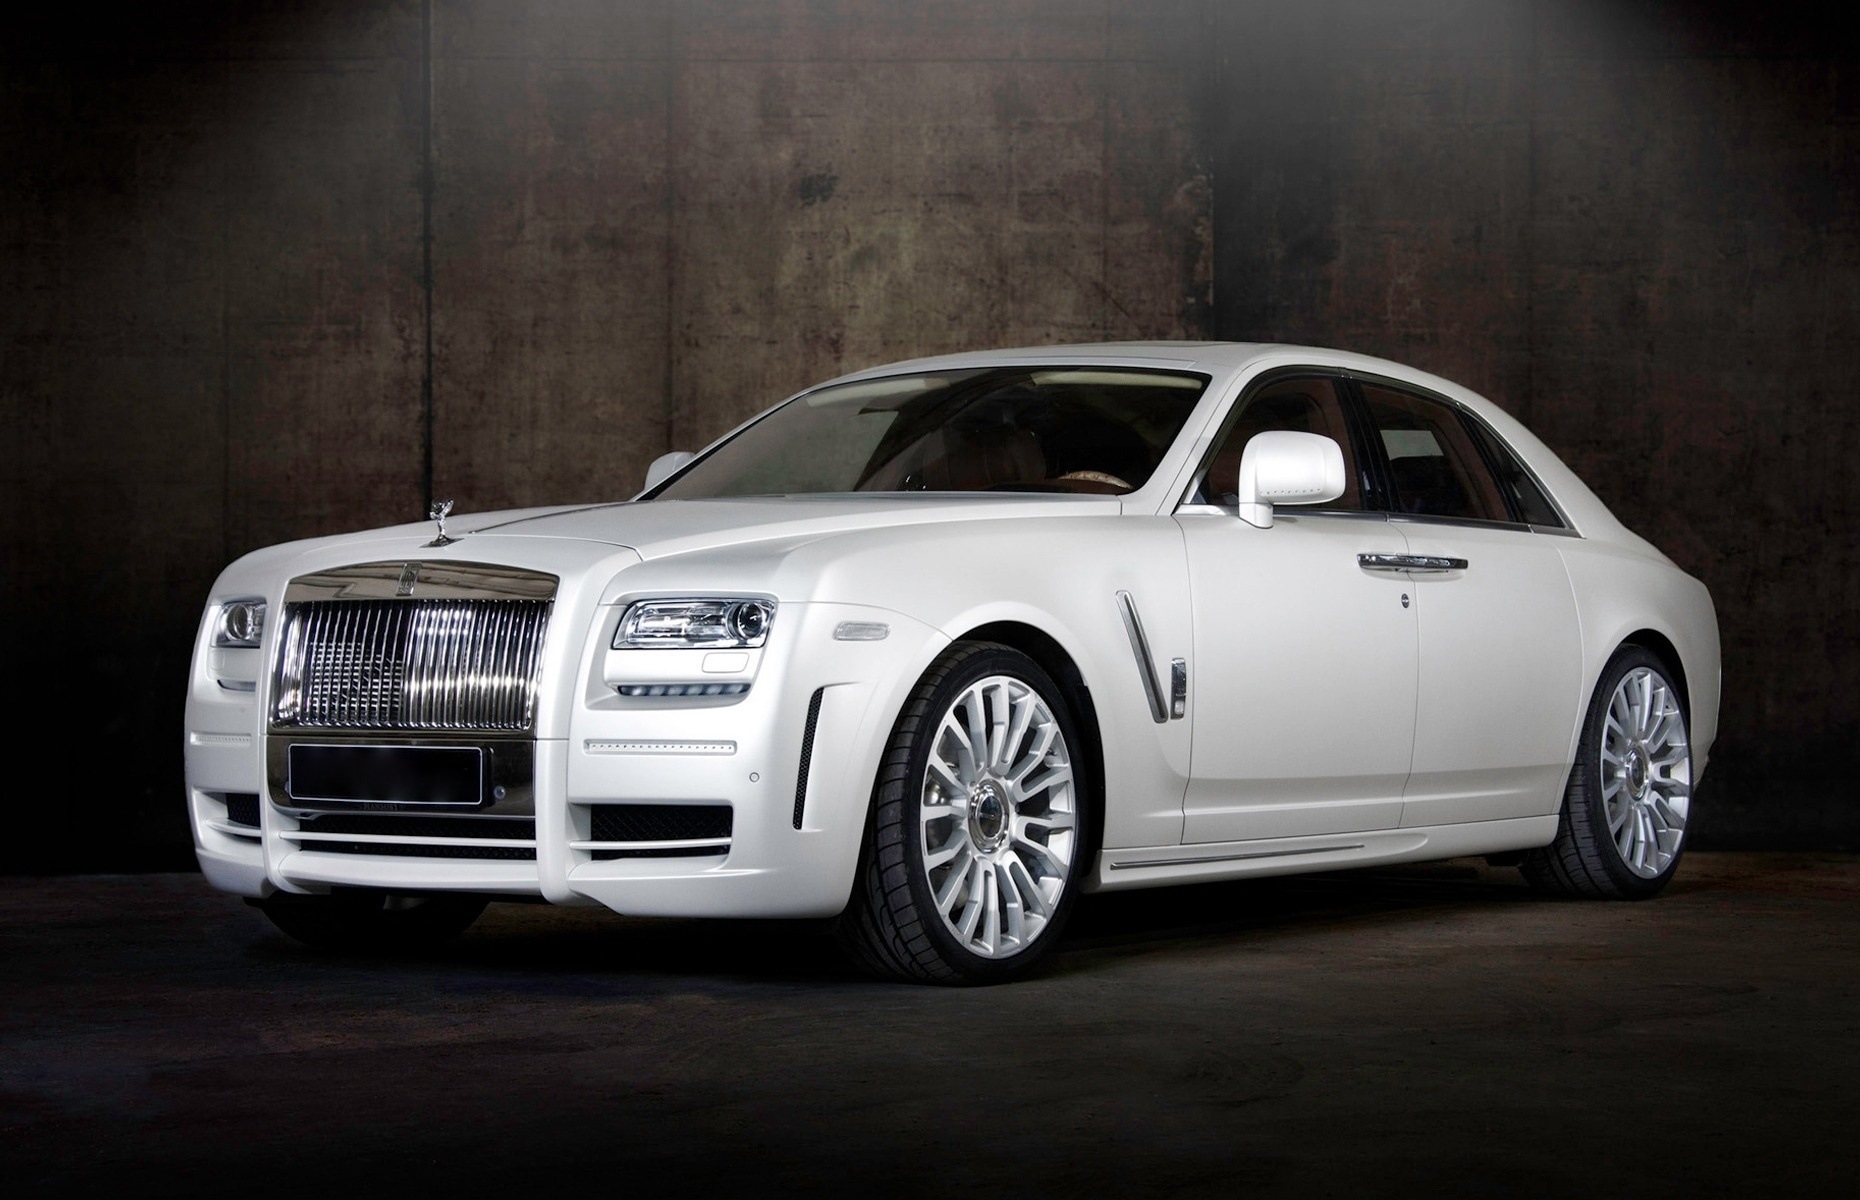 Are rolls royce reliable